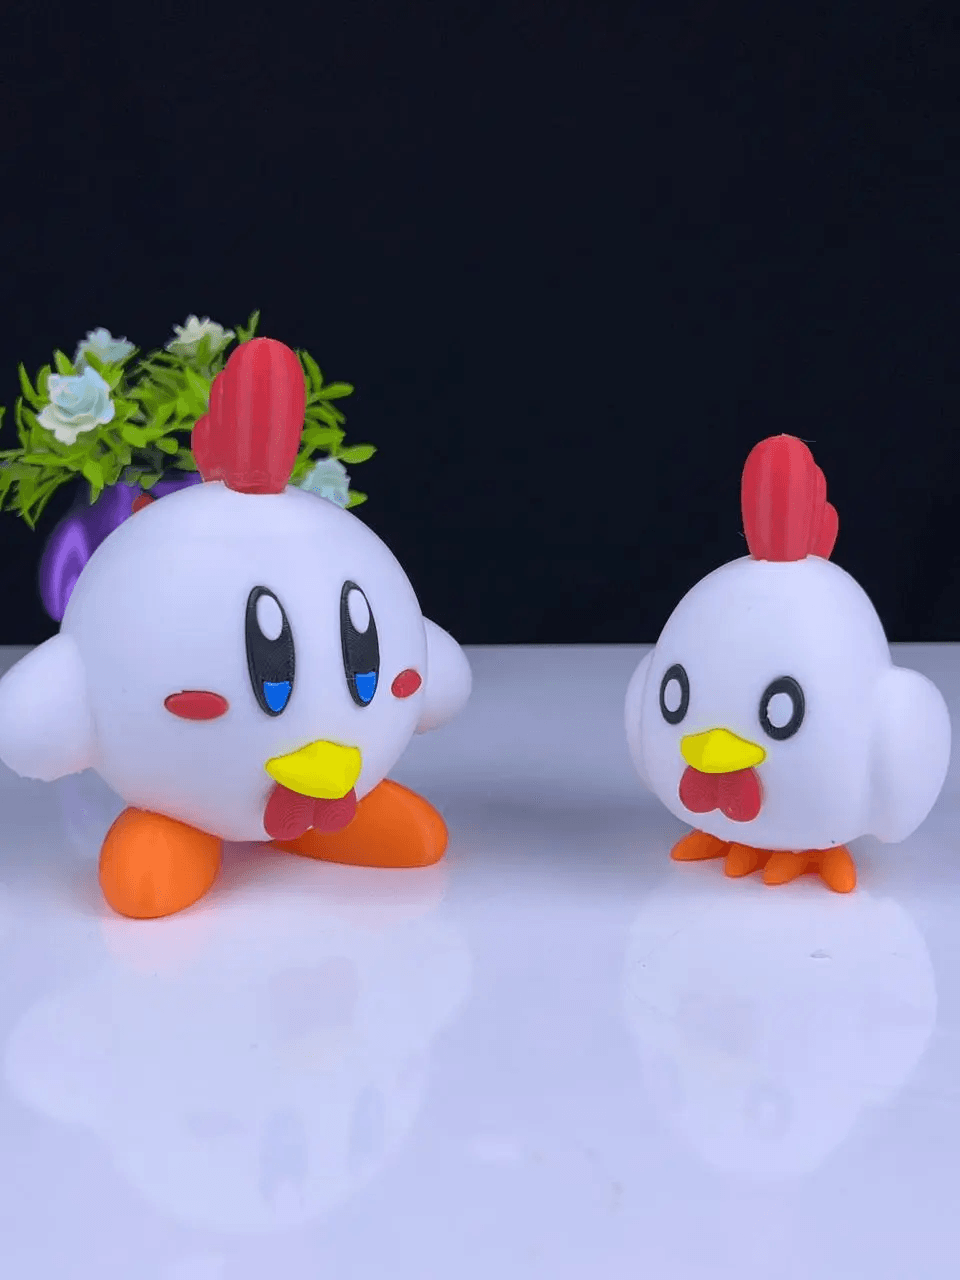 Kirby Chikipi - Multipart 3d model